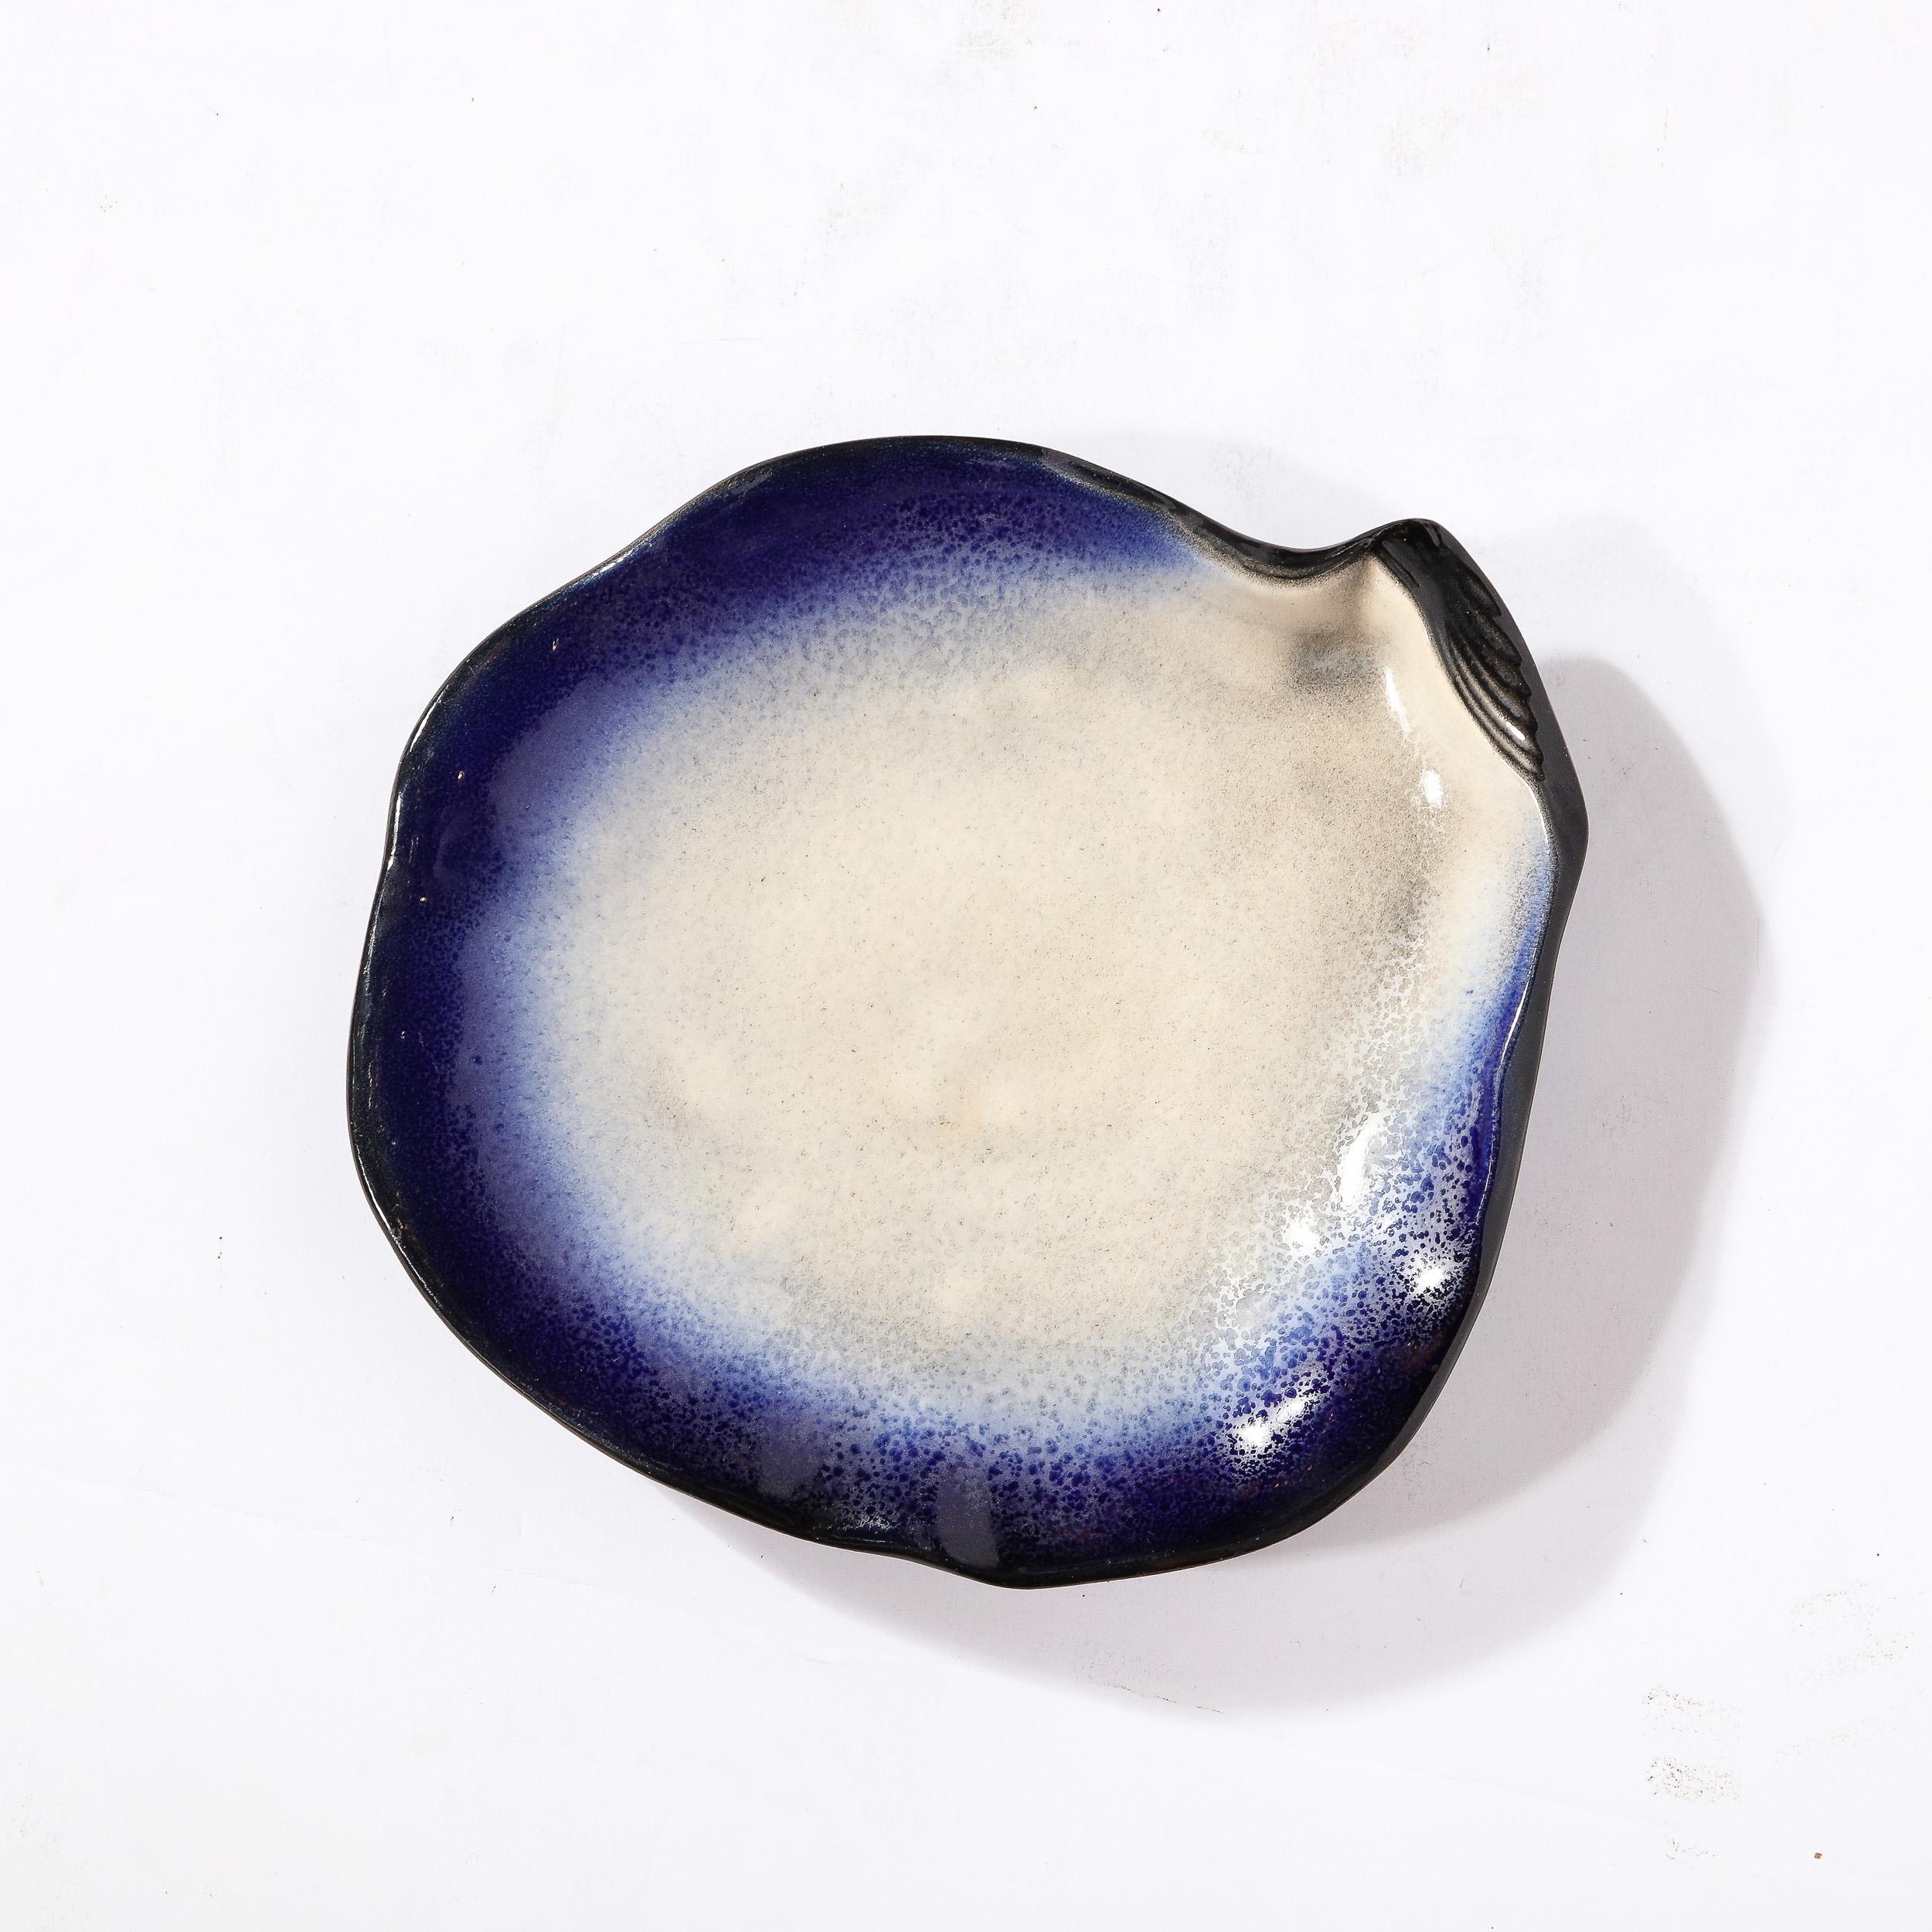 This lovely Oyster form Ceramic Plate signed Pol Chambost originates from France, Circa 1960. Depicting an abstracted Oyster with undulating natural curves around the edge of the piece, the surface has a gradient of deep ultramarine blue blending